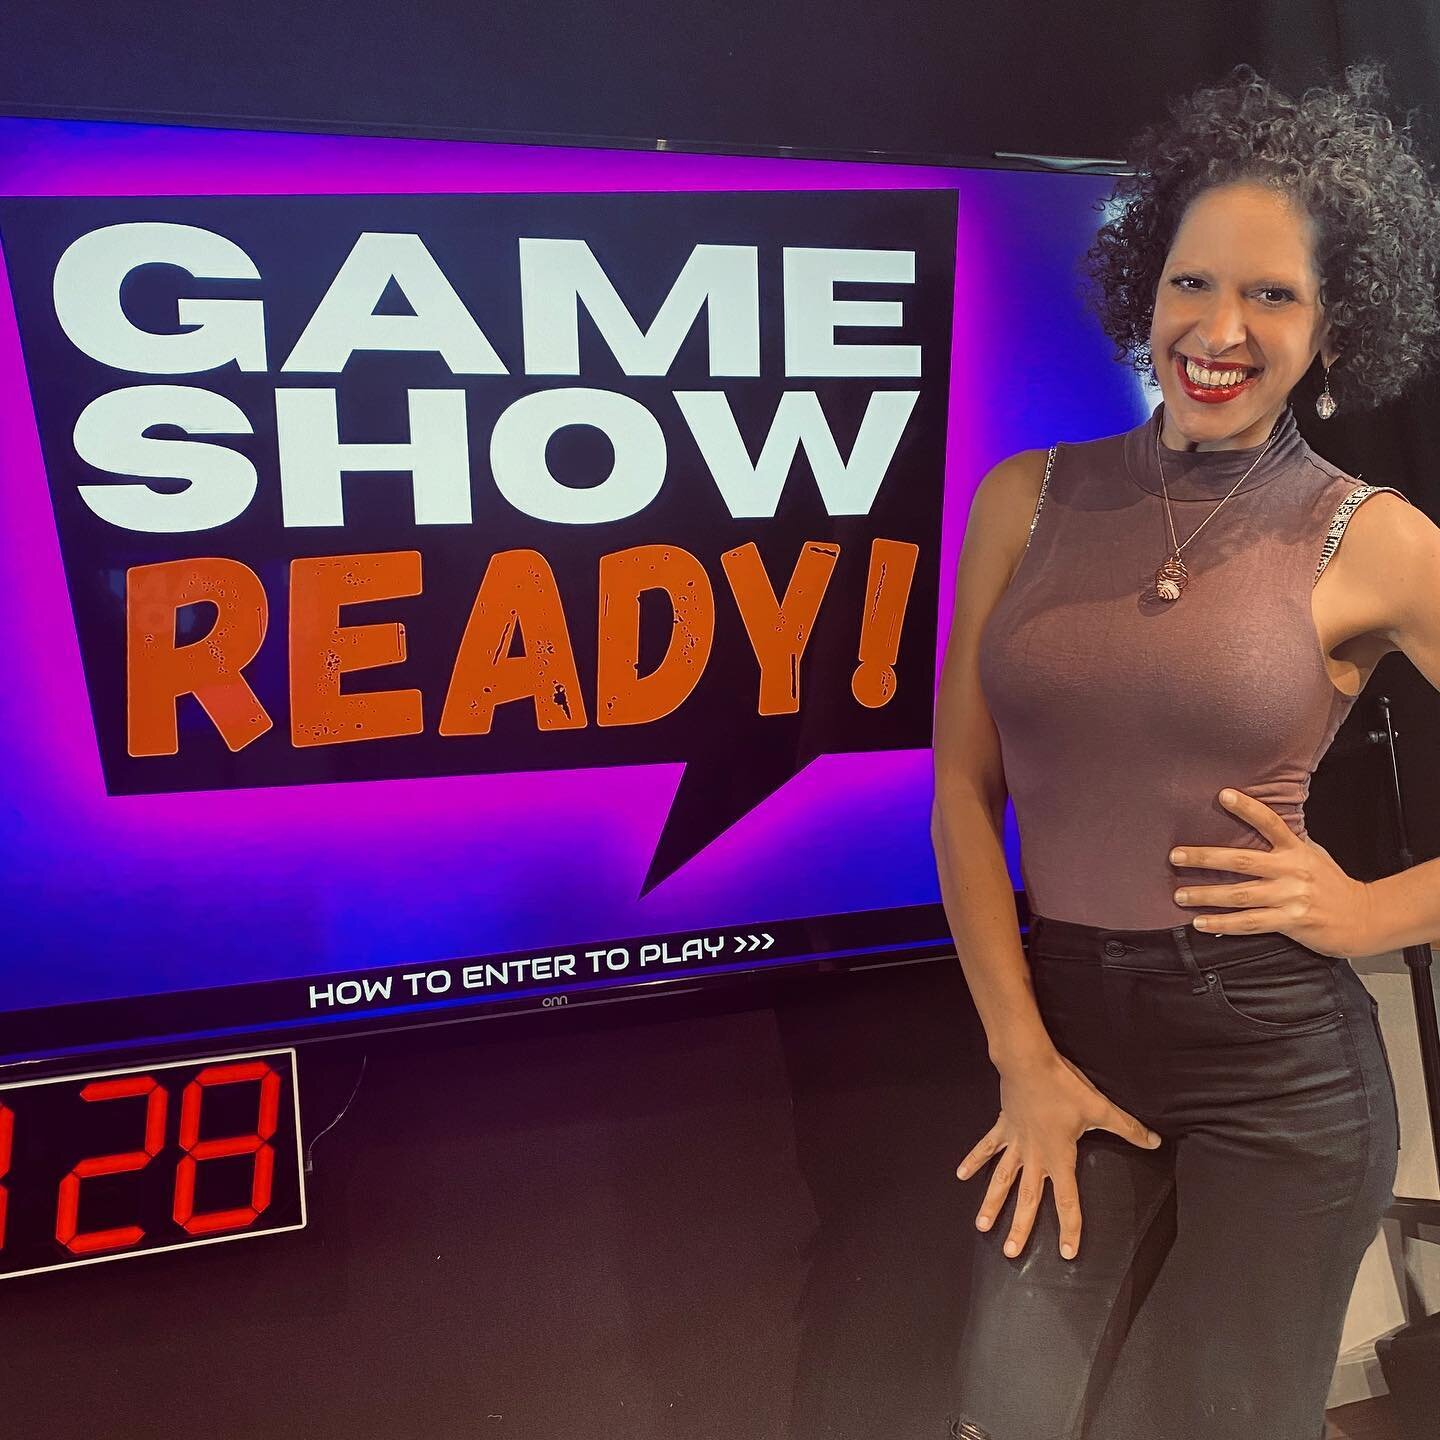 Grateful to be your Tuesday night host for Instagram Live's @gameshowready - but even MORE grateful for the jar of all-natural chunky peanut butter you can't see me squeezing between my knees. This is normal behavior, right?! See you Tuesday at 6pm P